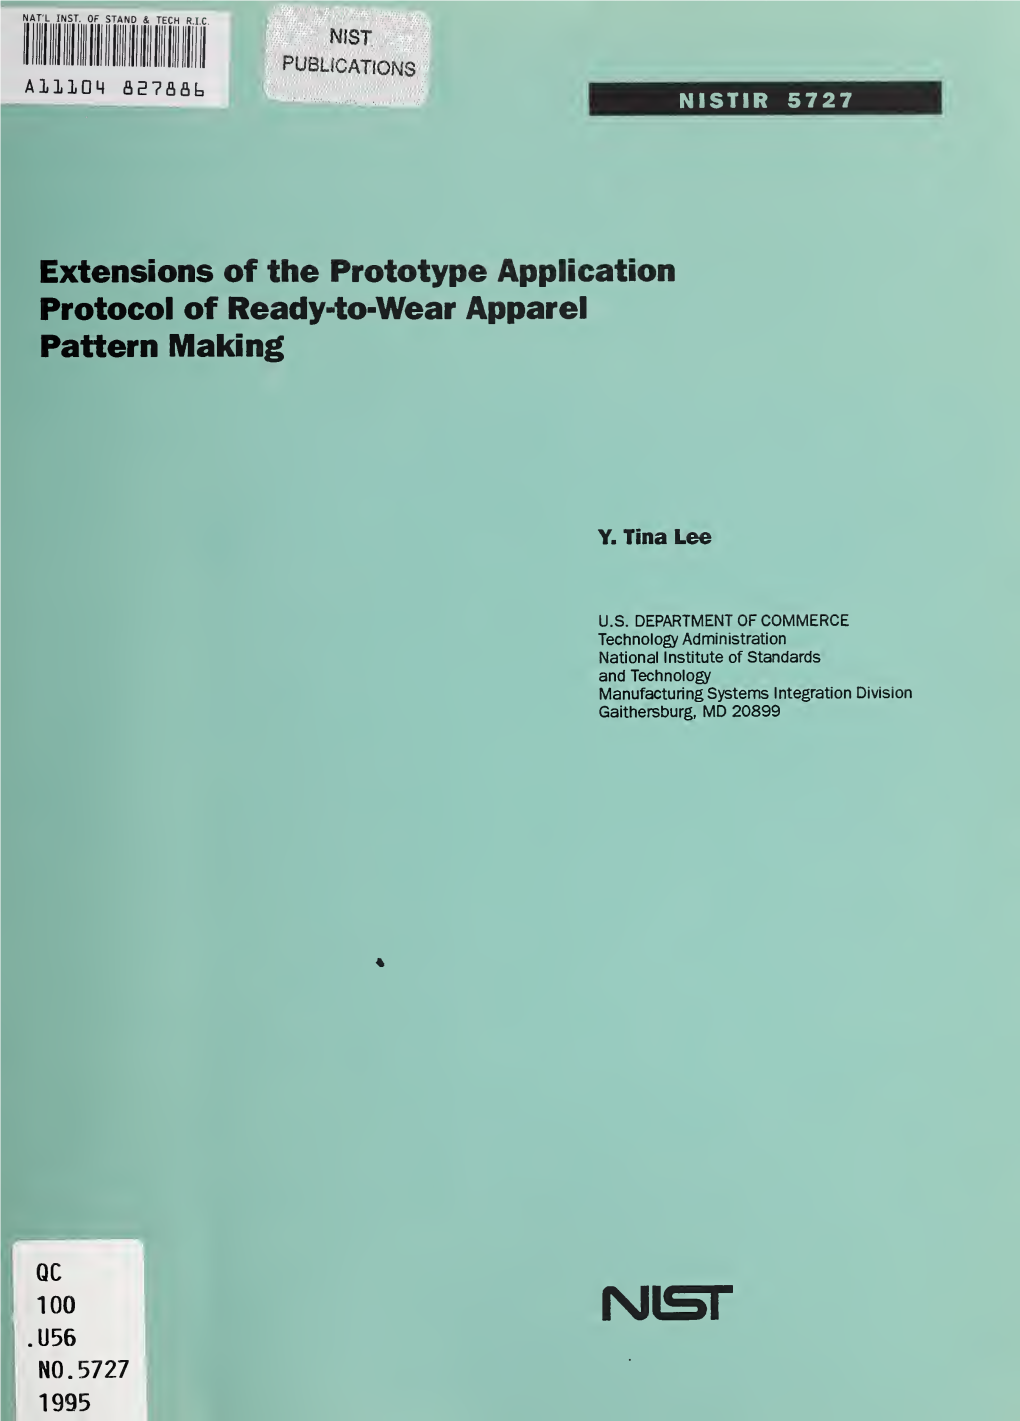 Extensions of the Prototype Application Protocol of Ready-To-Wear Apparel Pattern Making